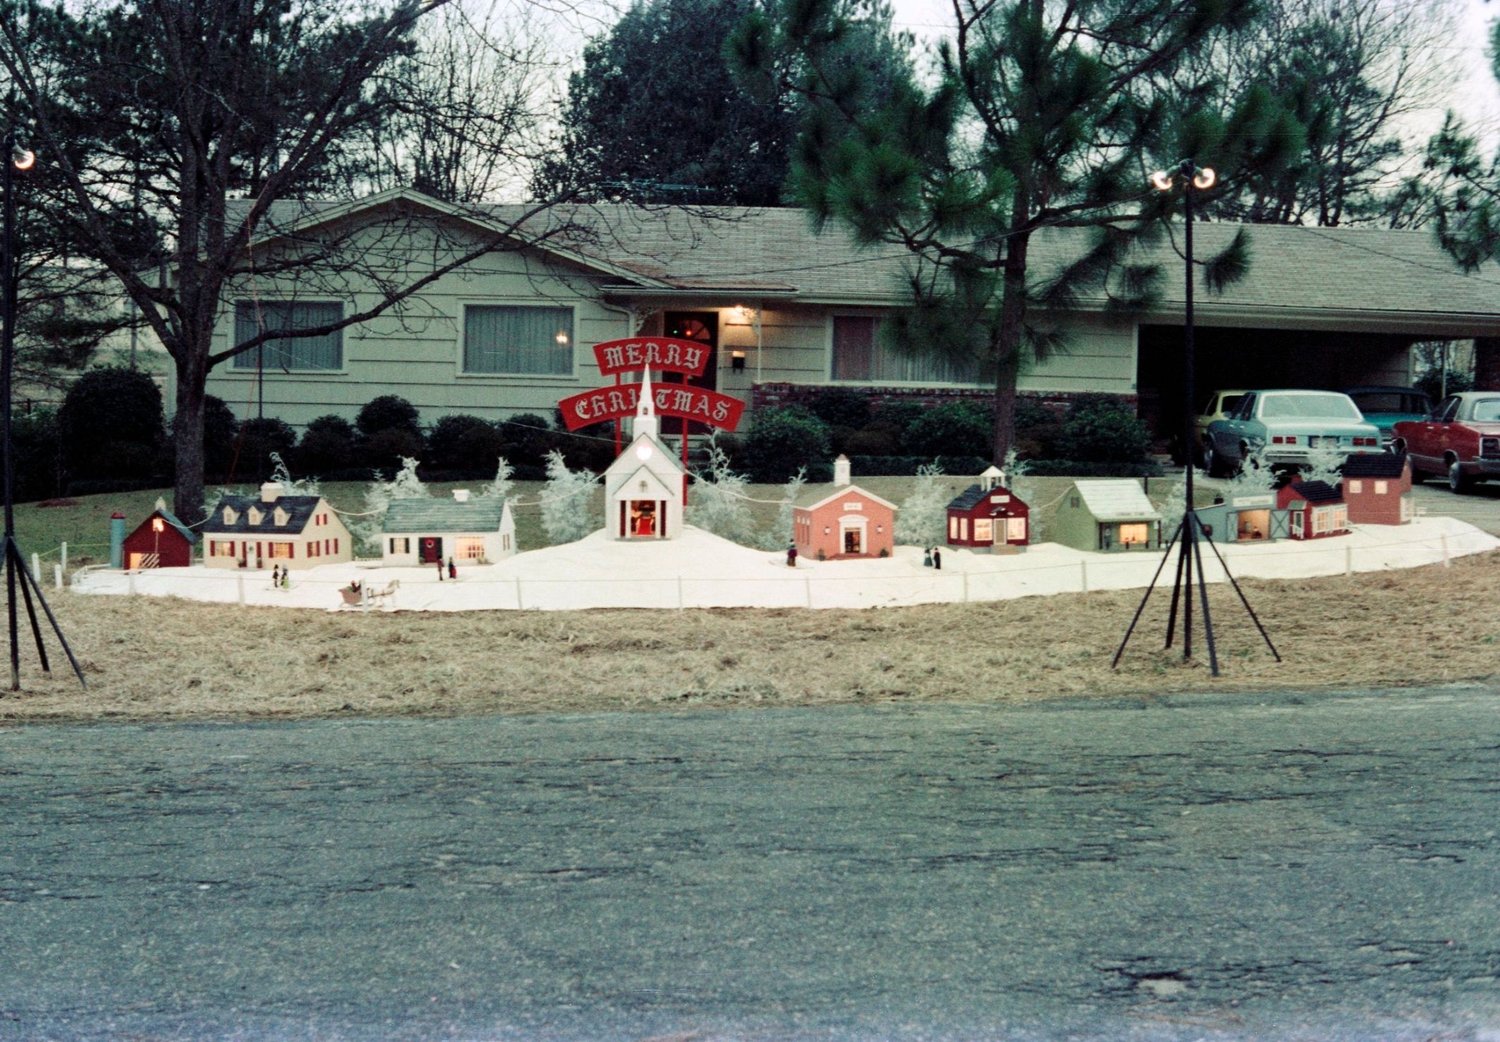 The village at its previous Berkley Drive location.